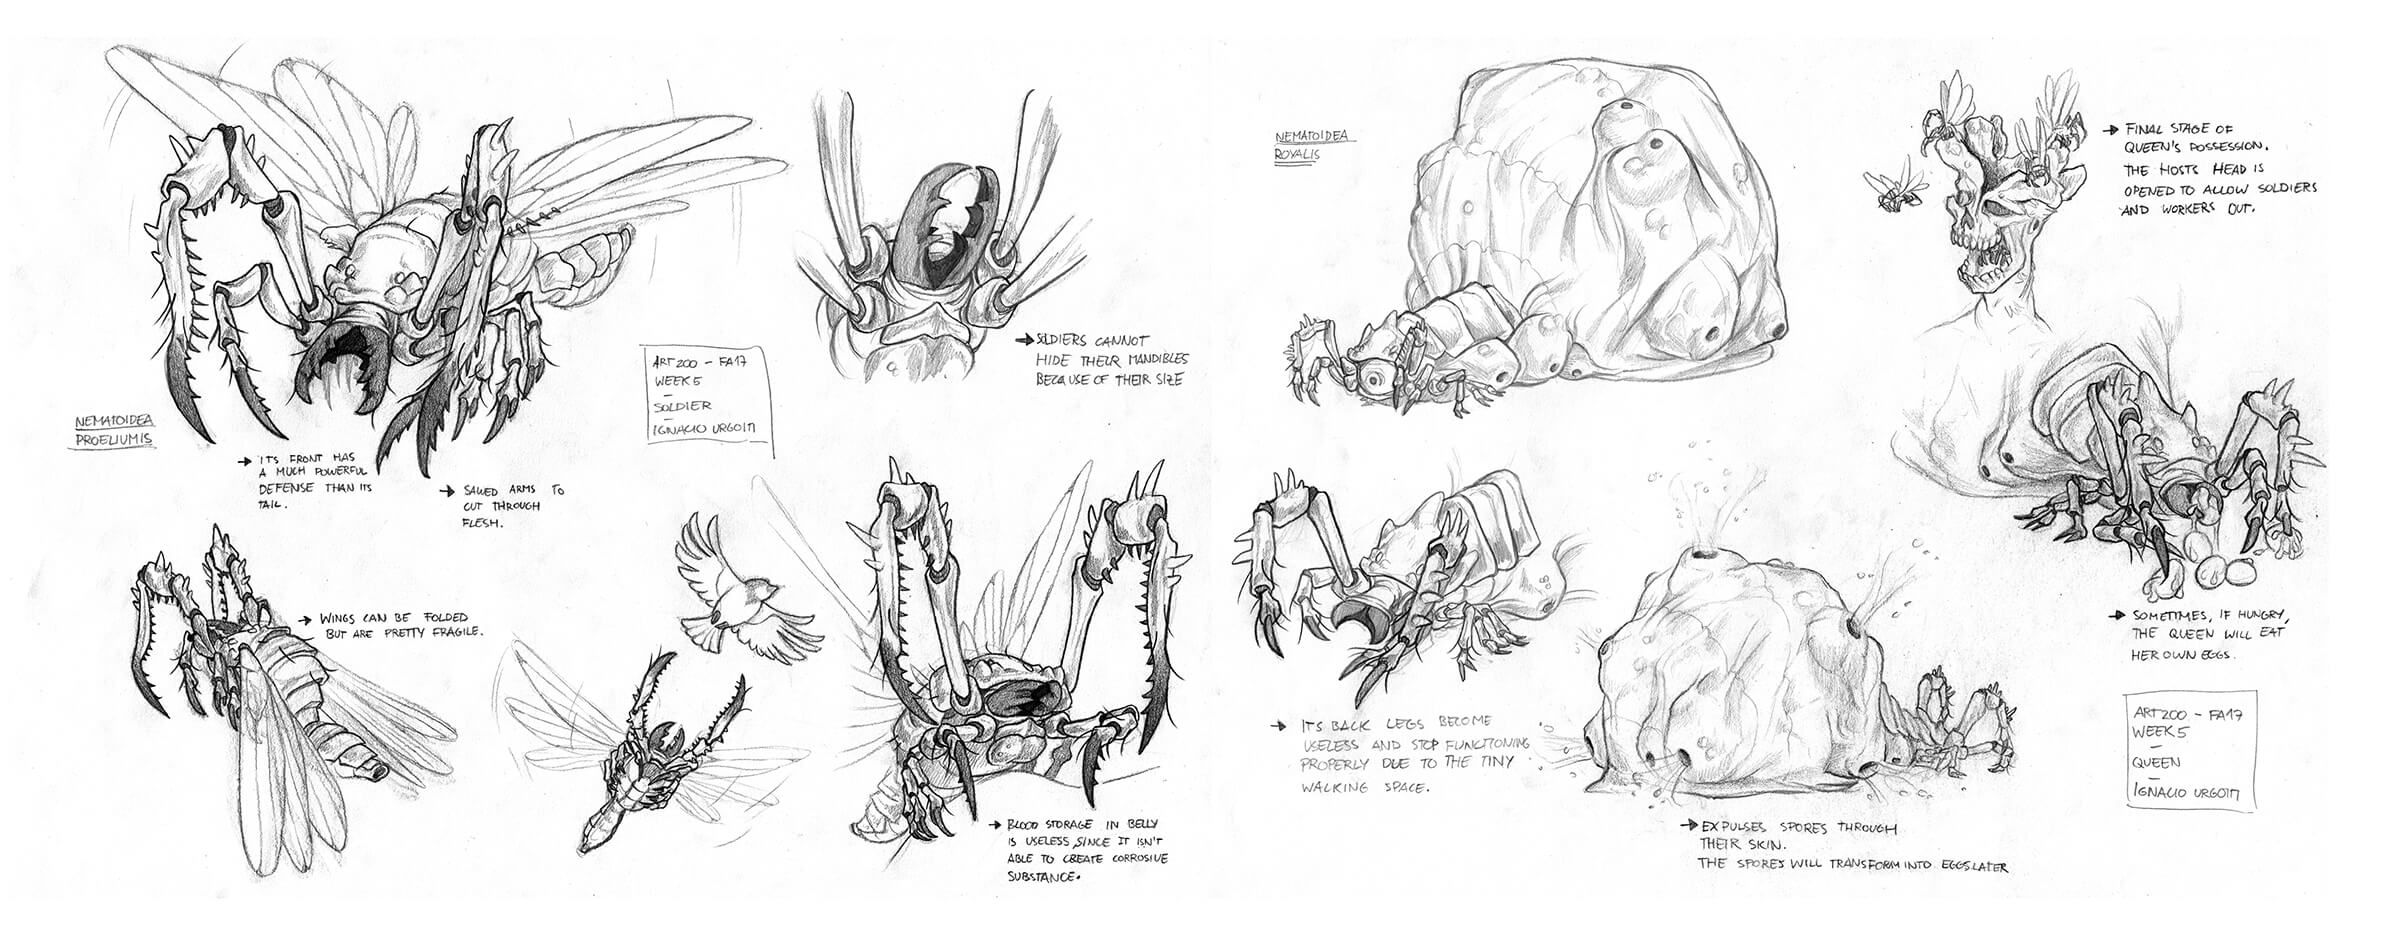 Black-and-white sketches of a fantastical flying insectoid with large pinching jaws, including its life cycle and prey.